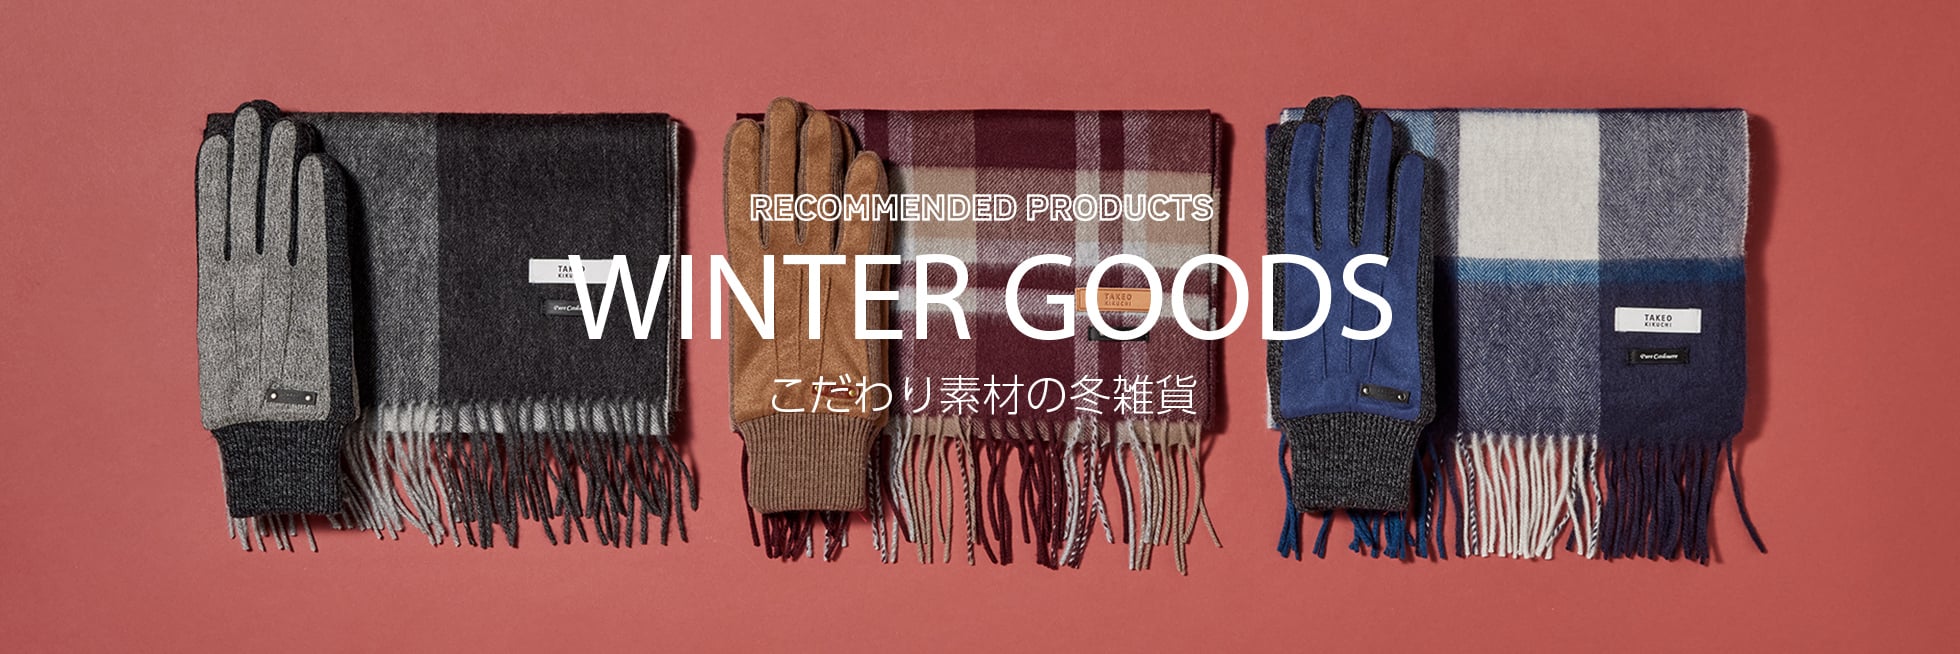 RECOMMENDED PRODUCTS WINTER GOODS こだわり素材の冬雑貨